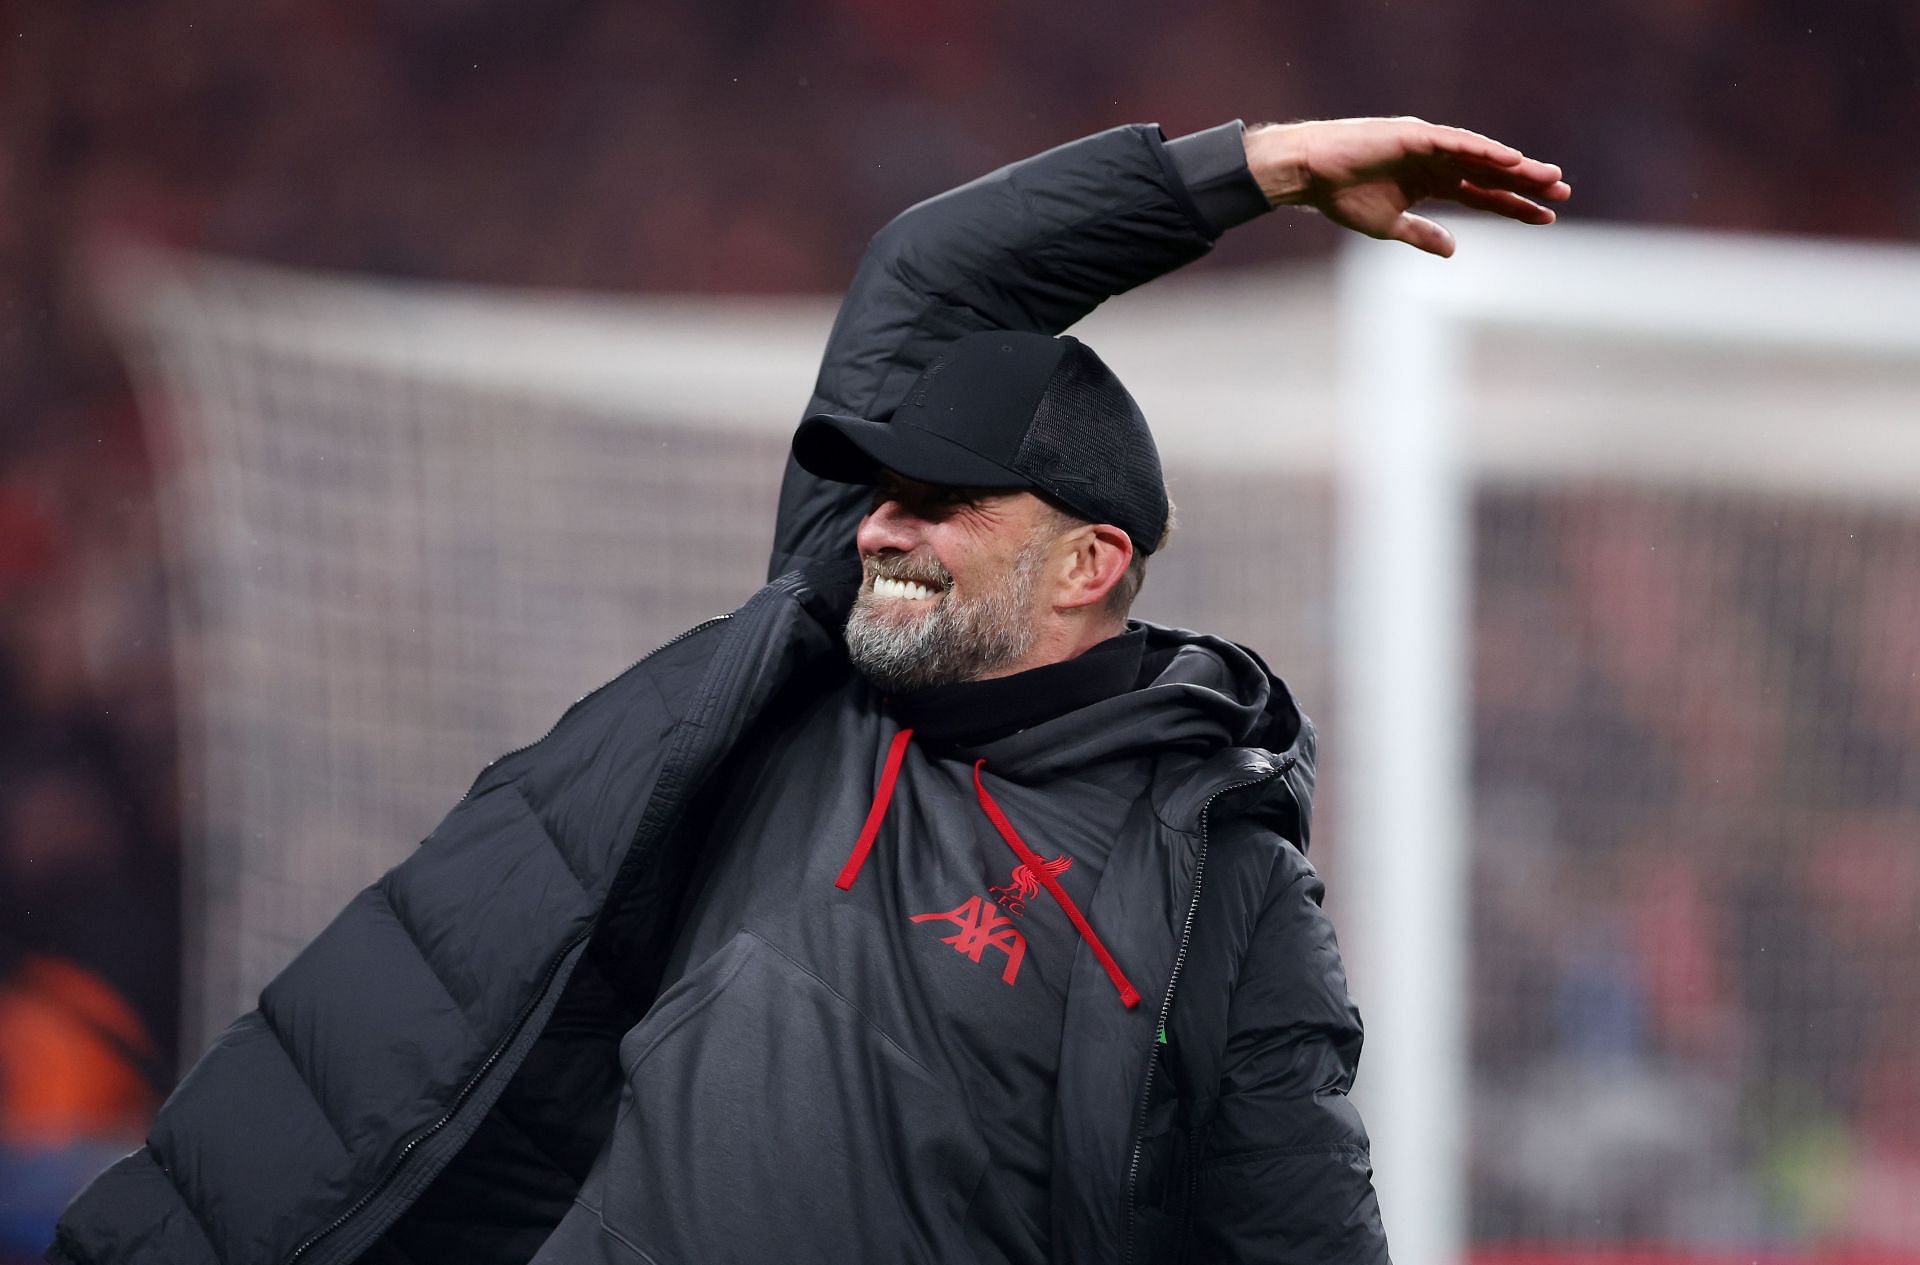 Liverpool hold positive talks with Jurgen Klopp replacement but face tough competition - Reports